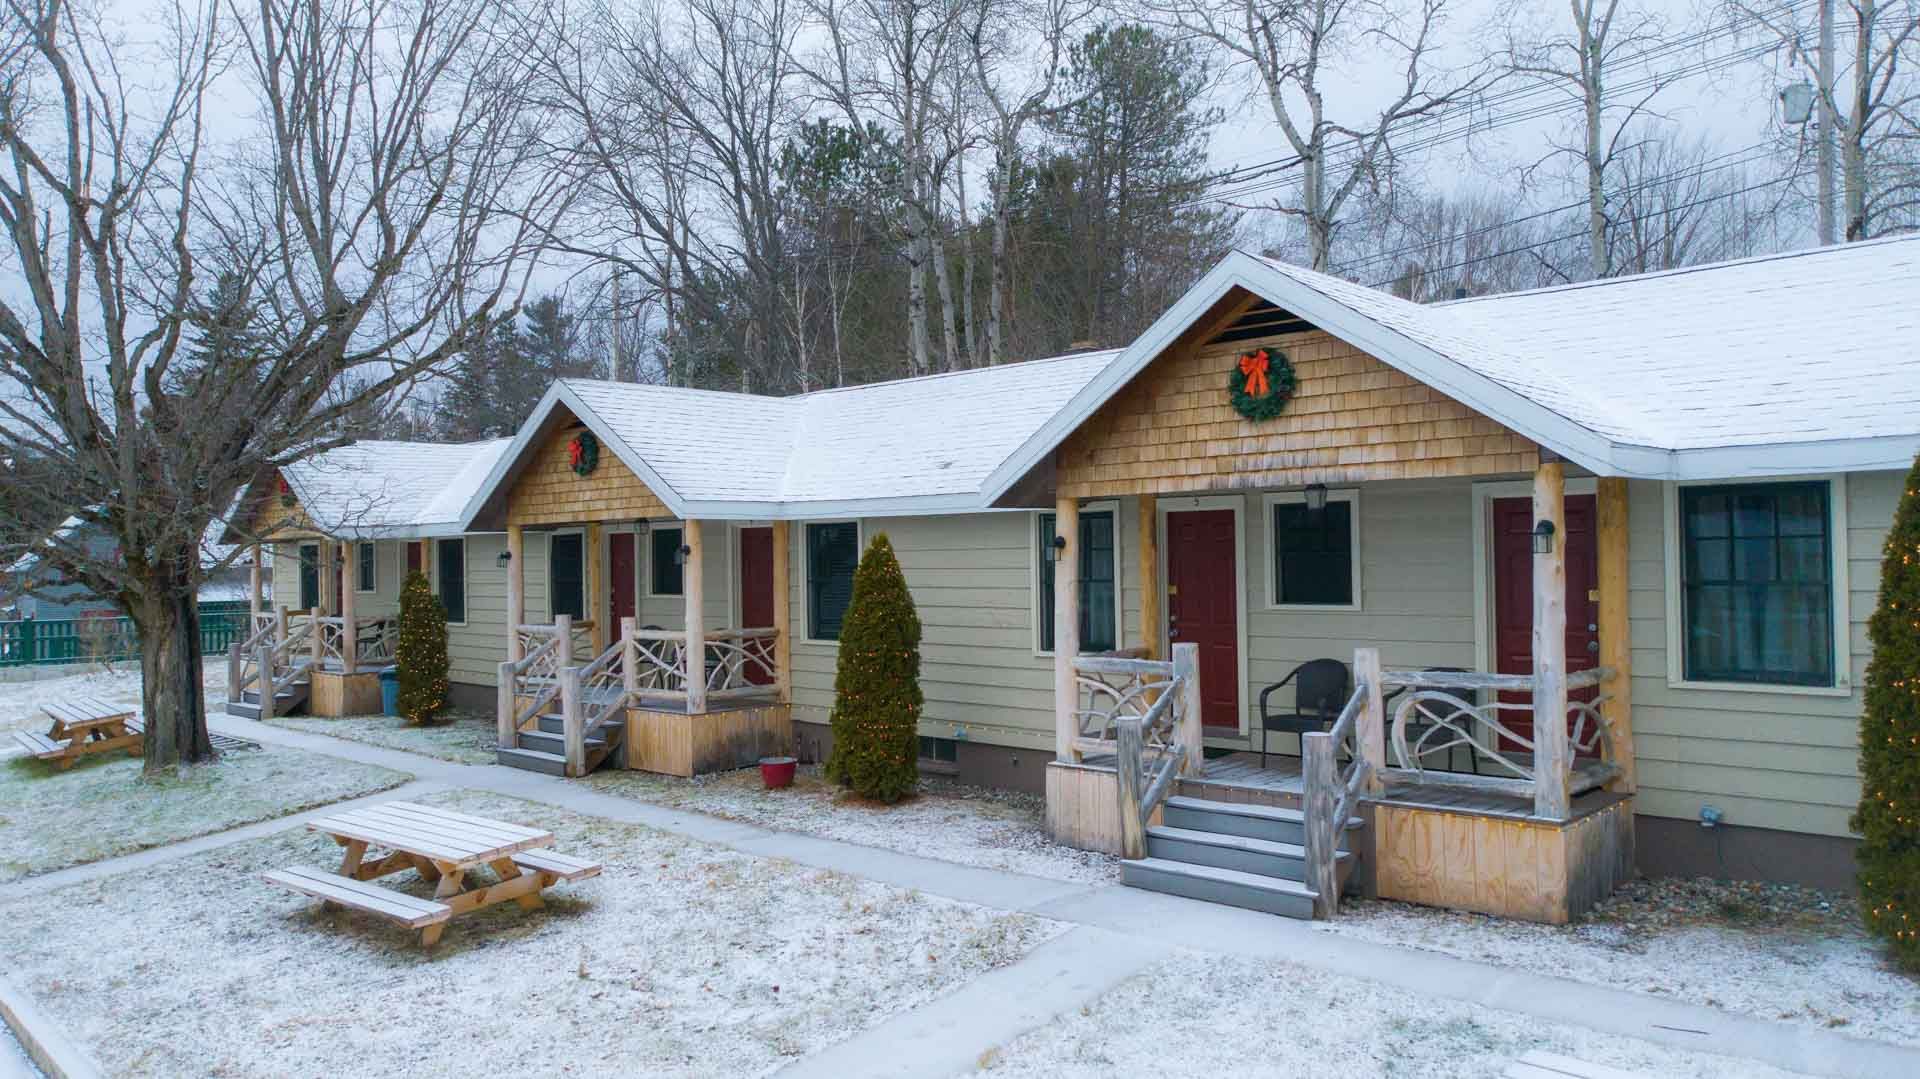 A row of small houses covered in snow with a picnic table in front of them.